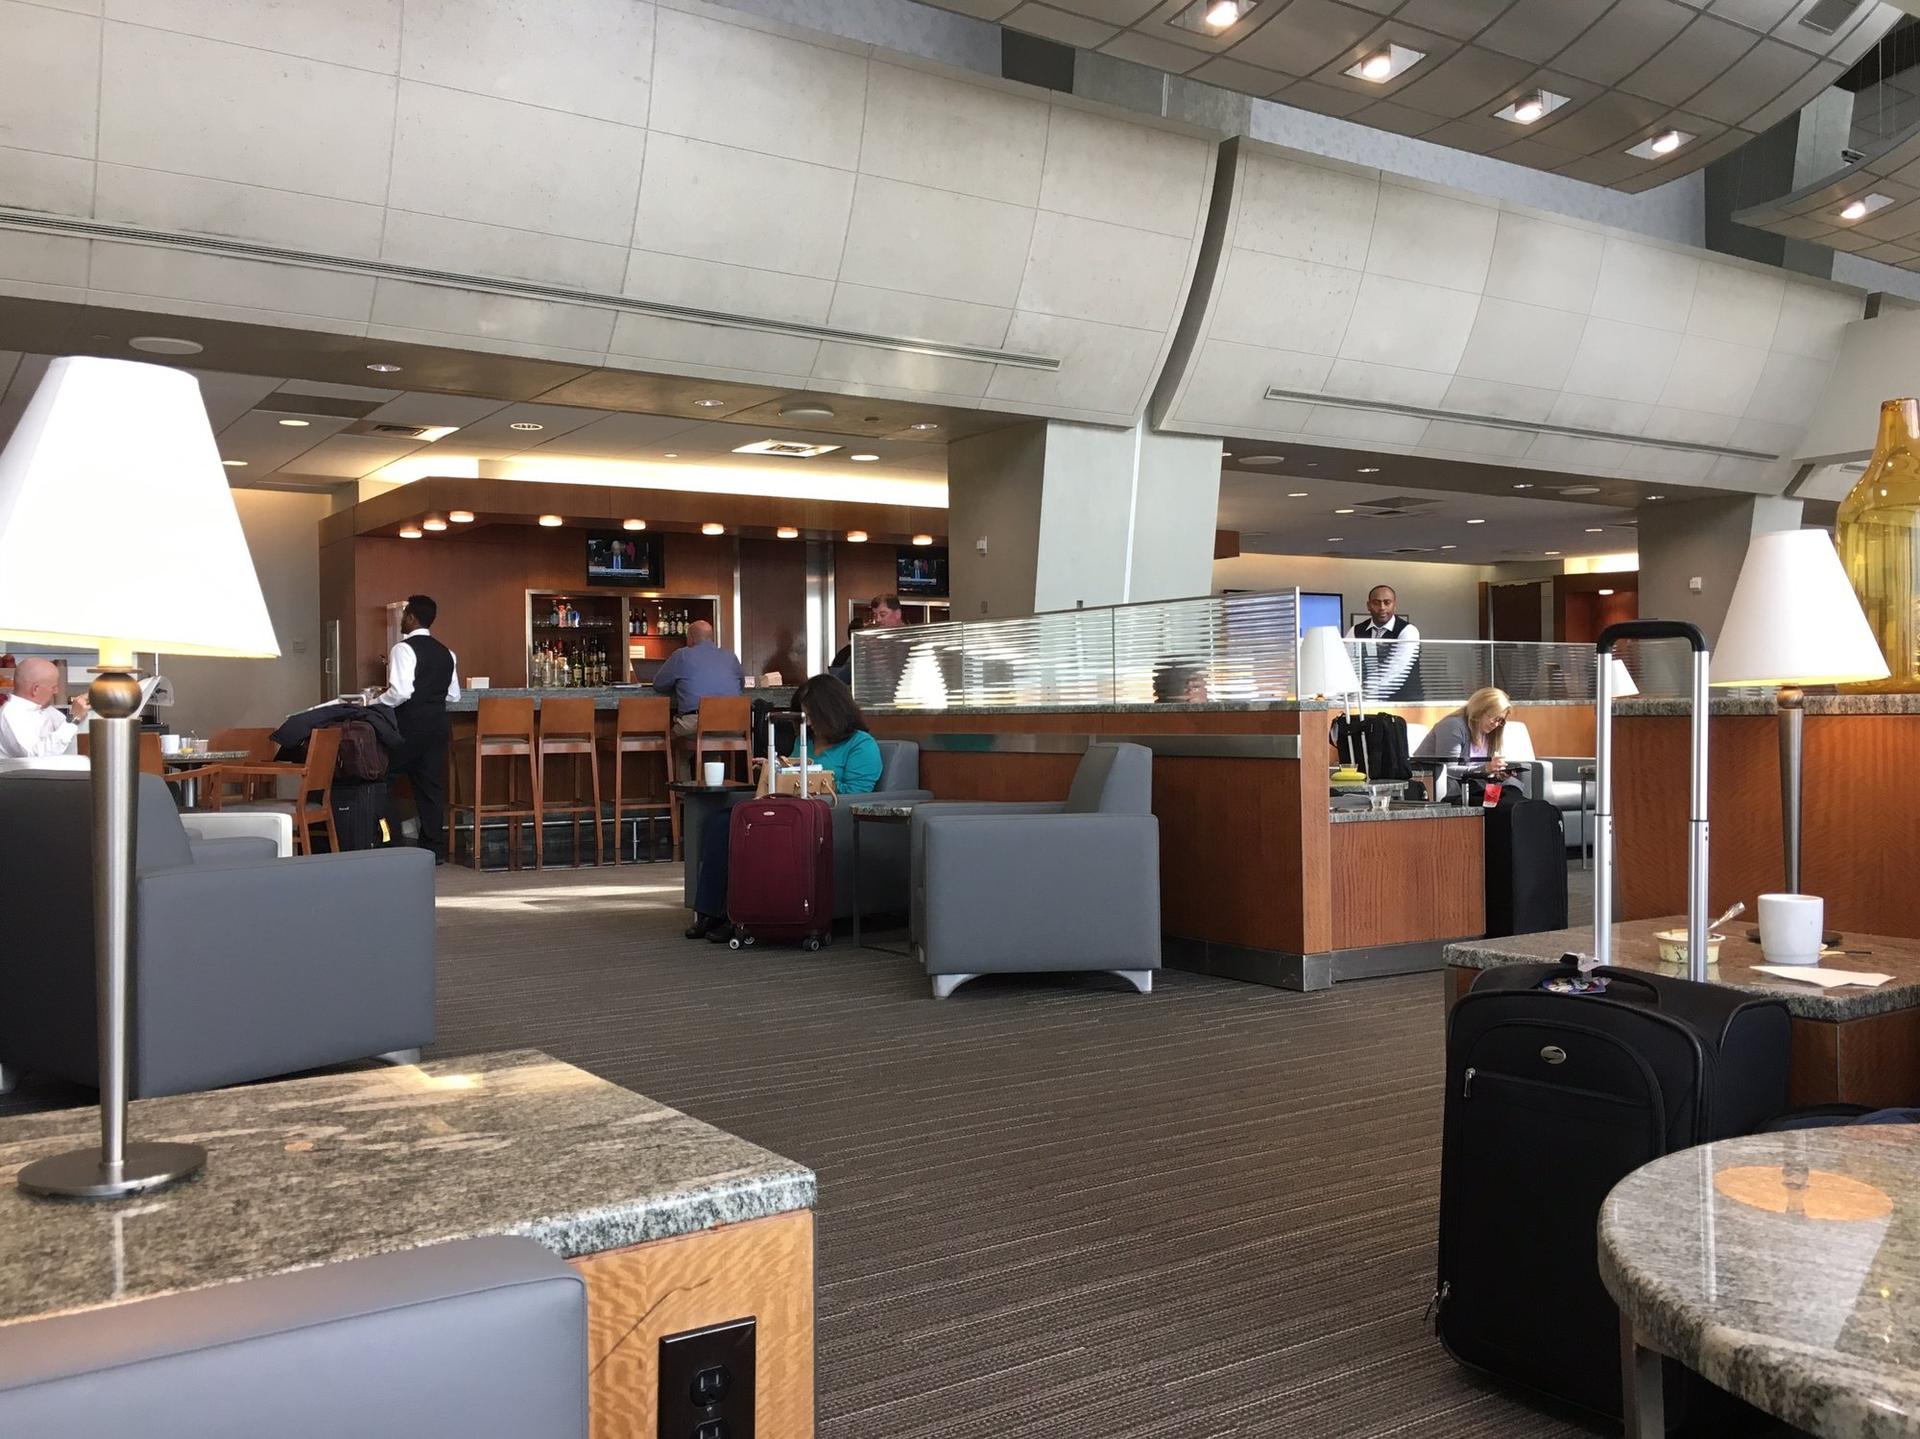 American Airlines Admirals Club image 20 of 48